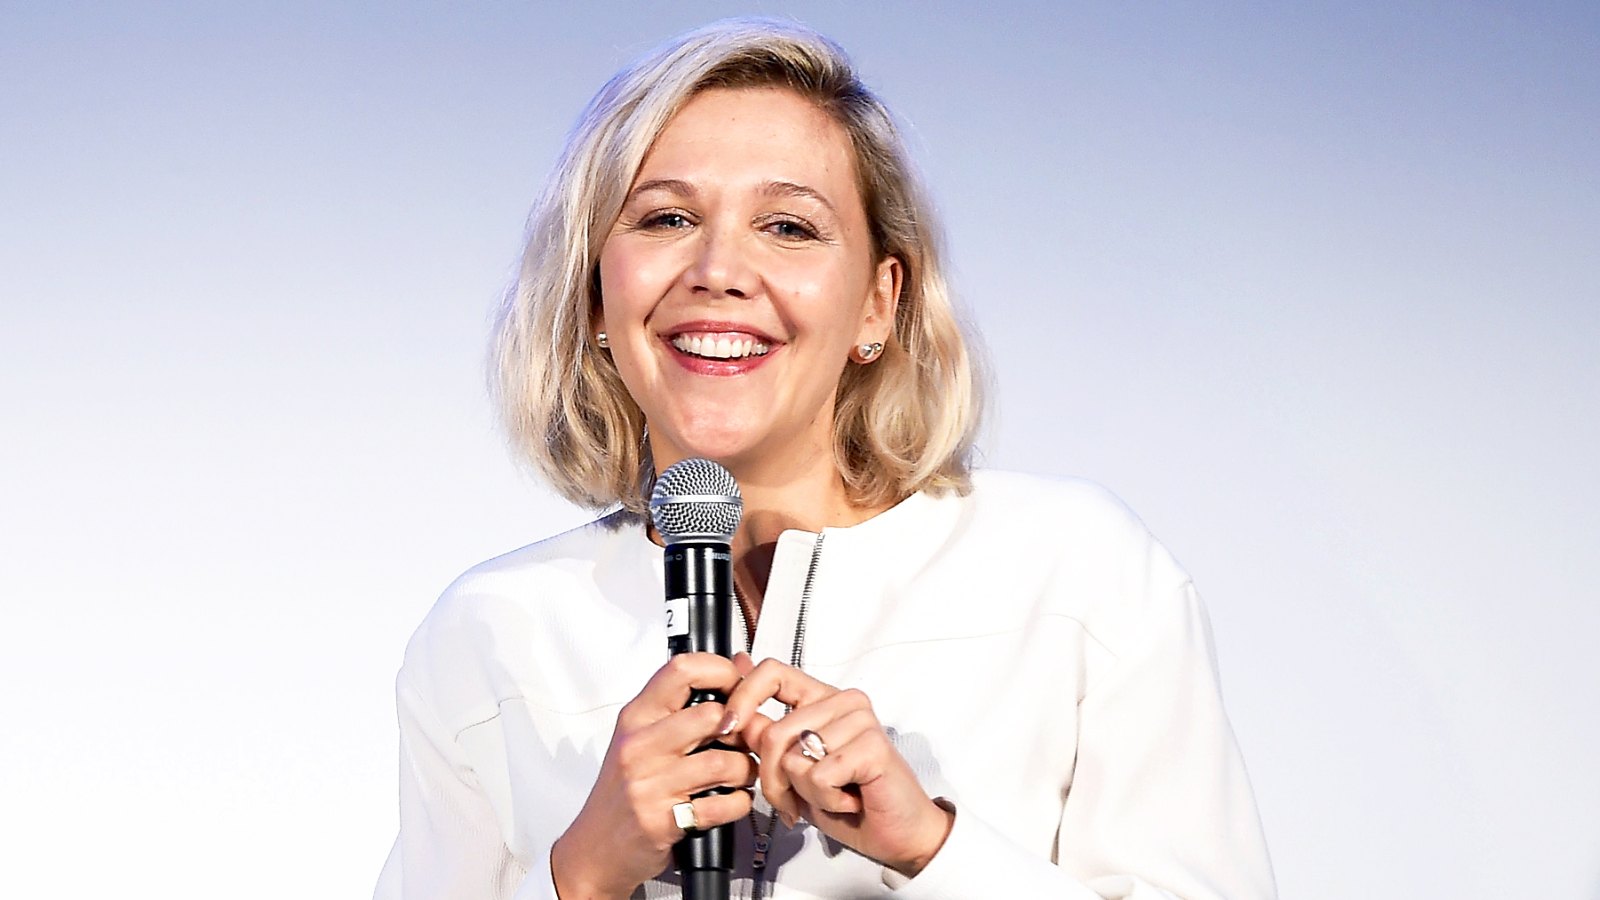 Maggie Gyllenhaal speaks onstage at Vulture Festival Presented By AT&T at Milk Studios on May 19, 2018 in New York City.